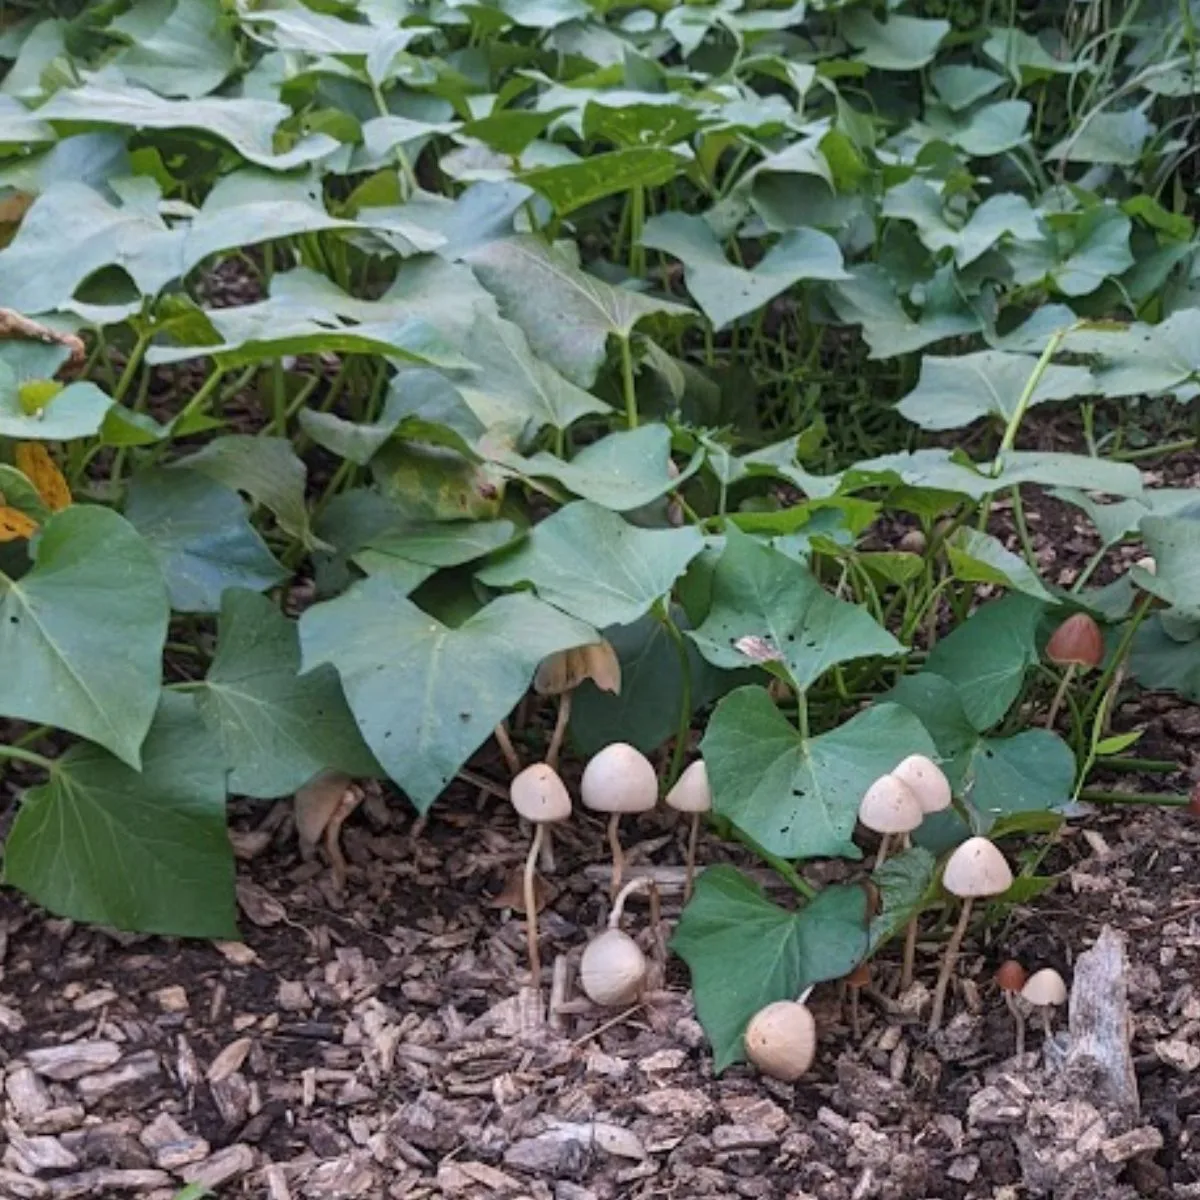 mushrooms growing next to our sweet potato vines